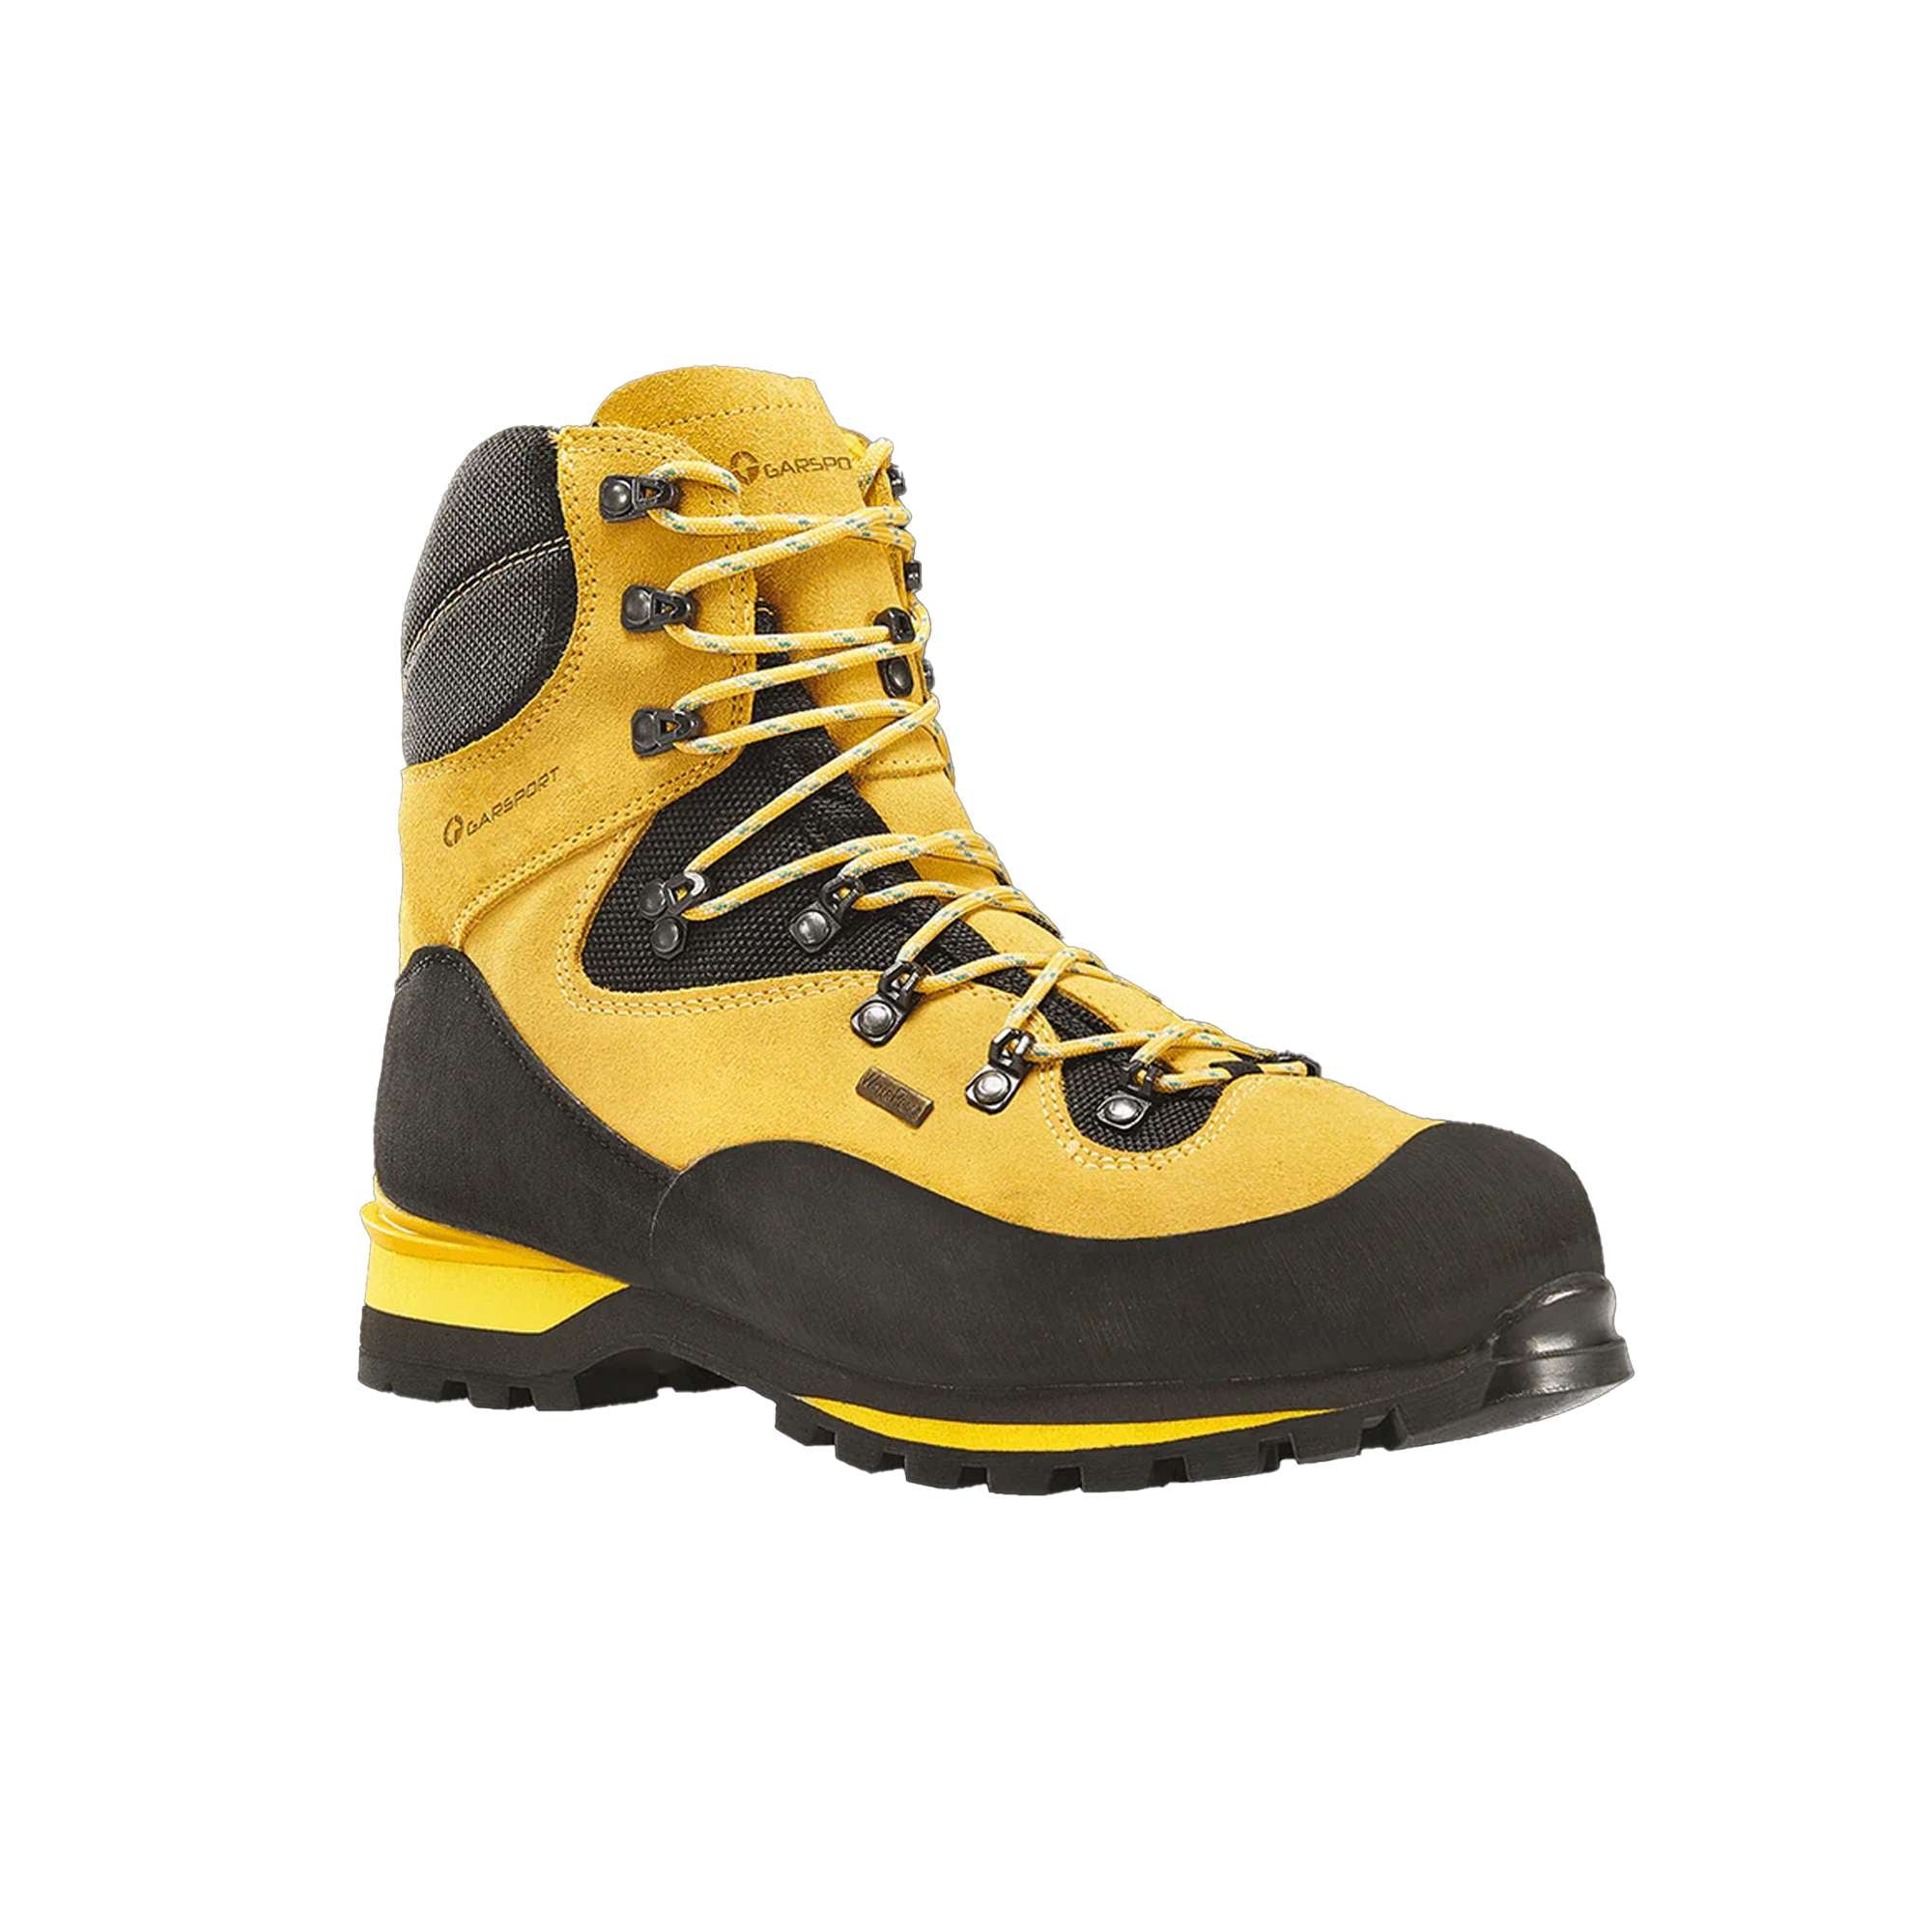 Shoe alpine route wp yellow - gdt20100010077